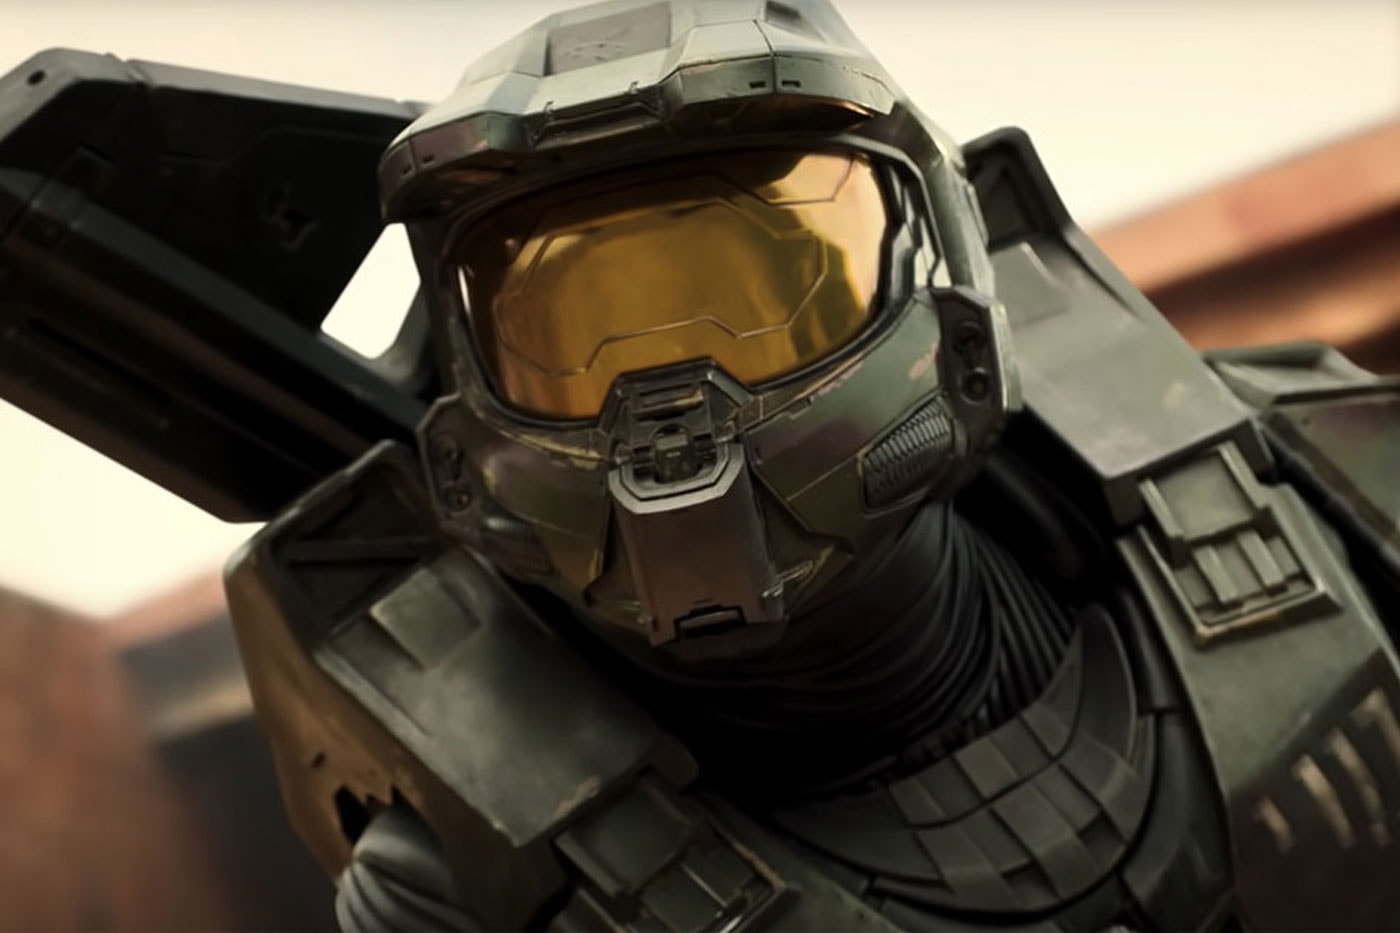 Paramount+ Drops New 'Halo' TV Series Trailer To Announce Official Release Date nfl afc championship game cbs parmount+ live-action series first person shooter